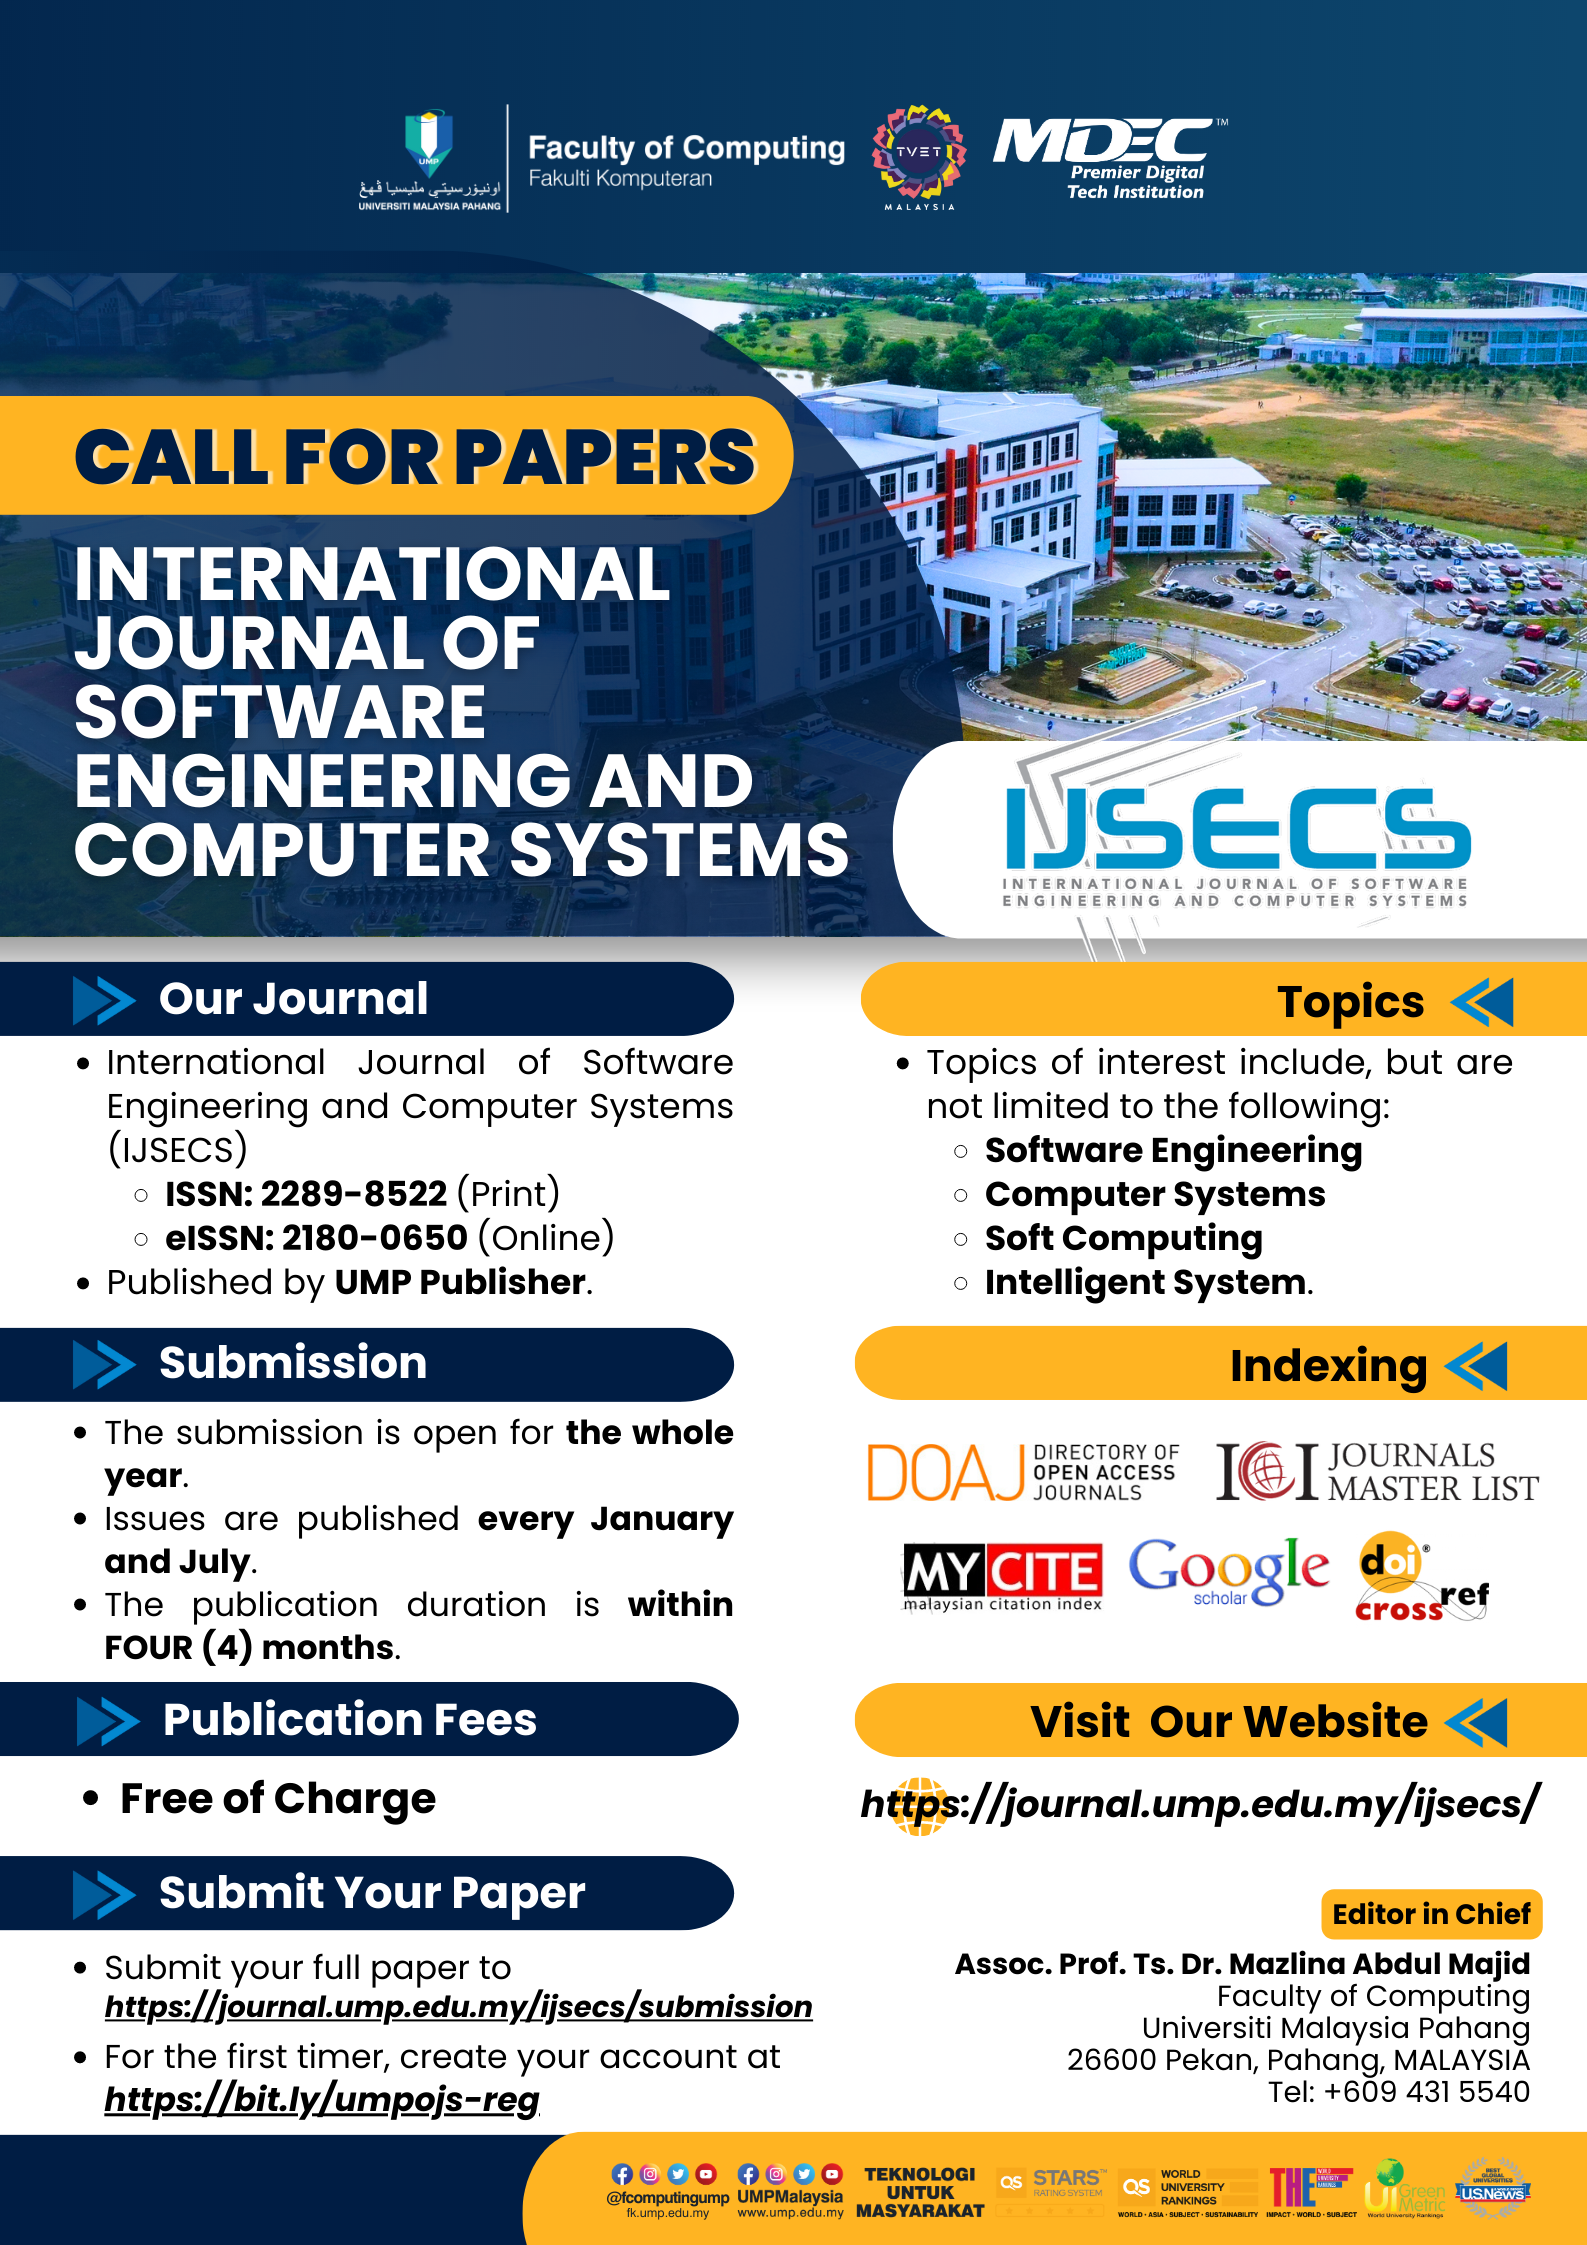 Call for Papers - International Journal of Software Engineering and Computer Systems (IJSECS)